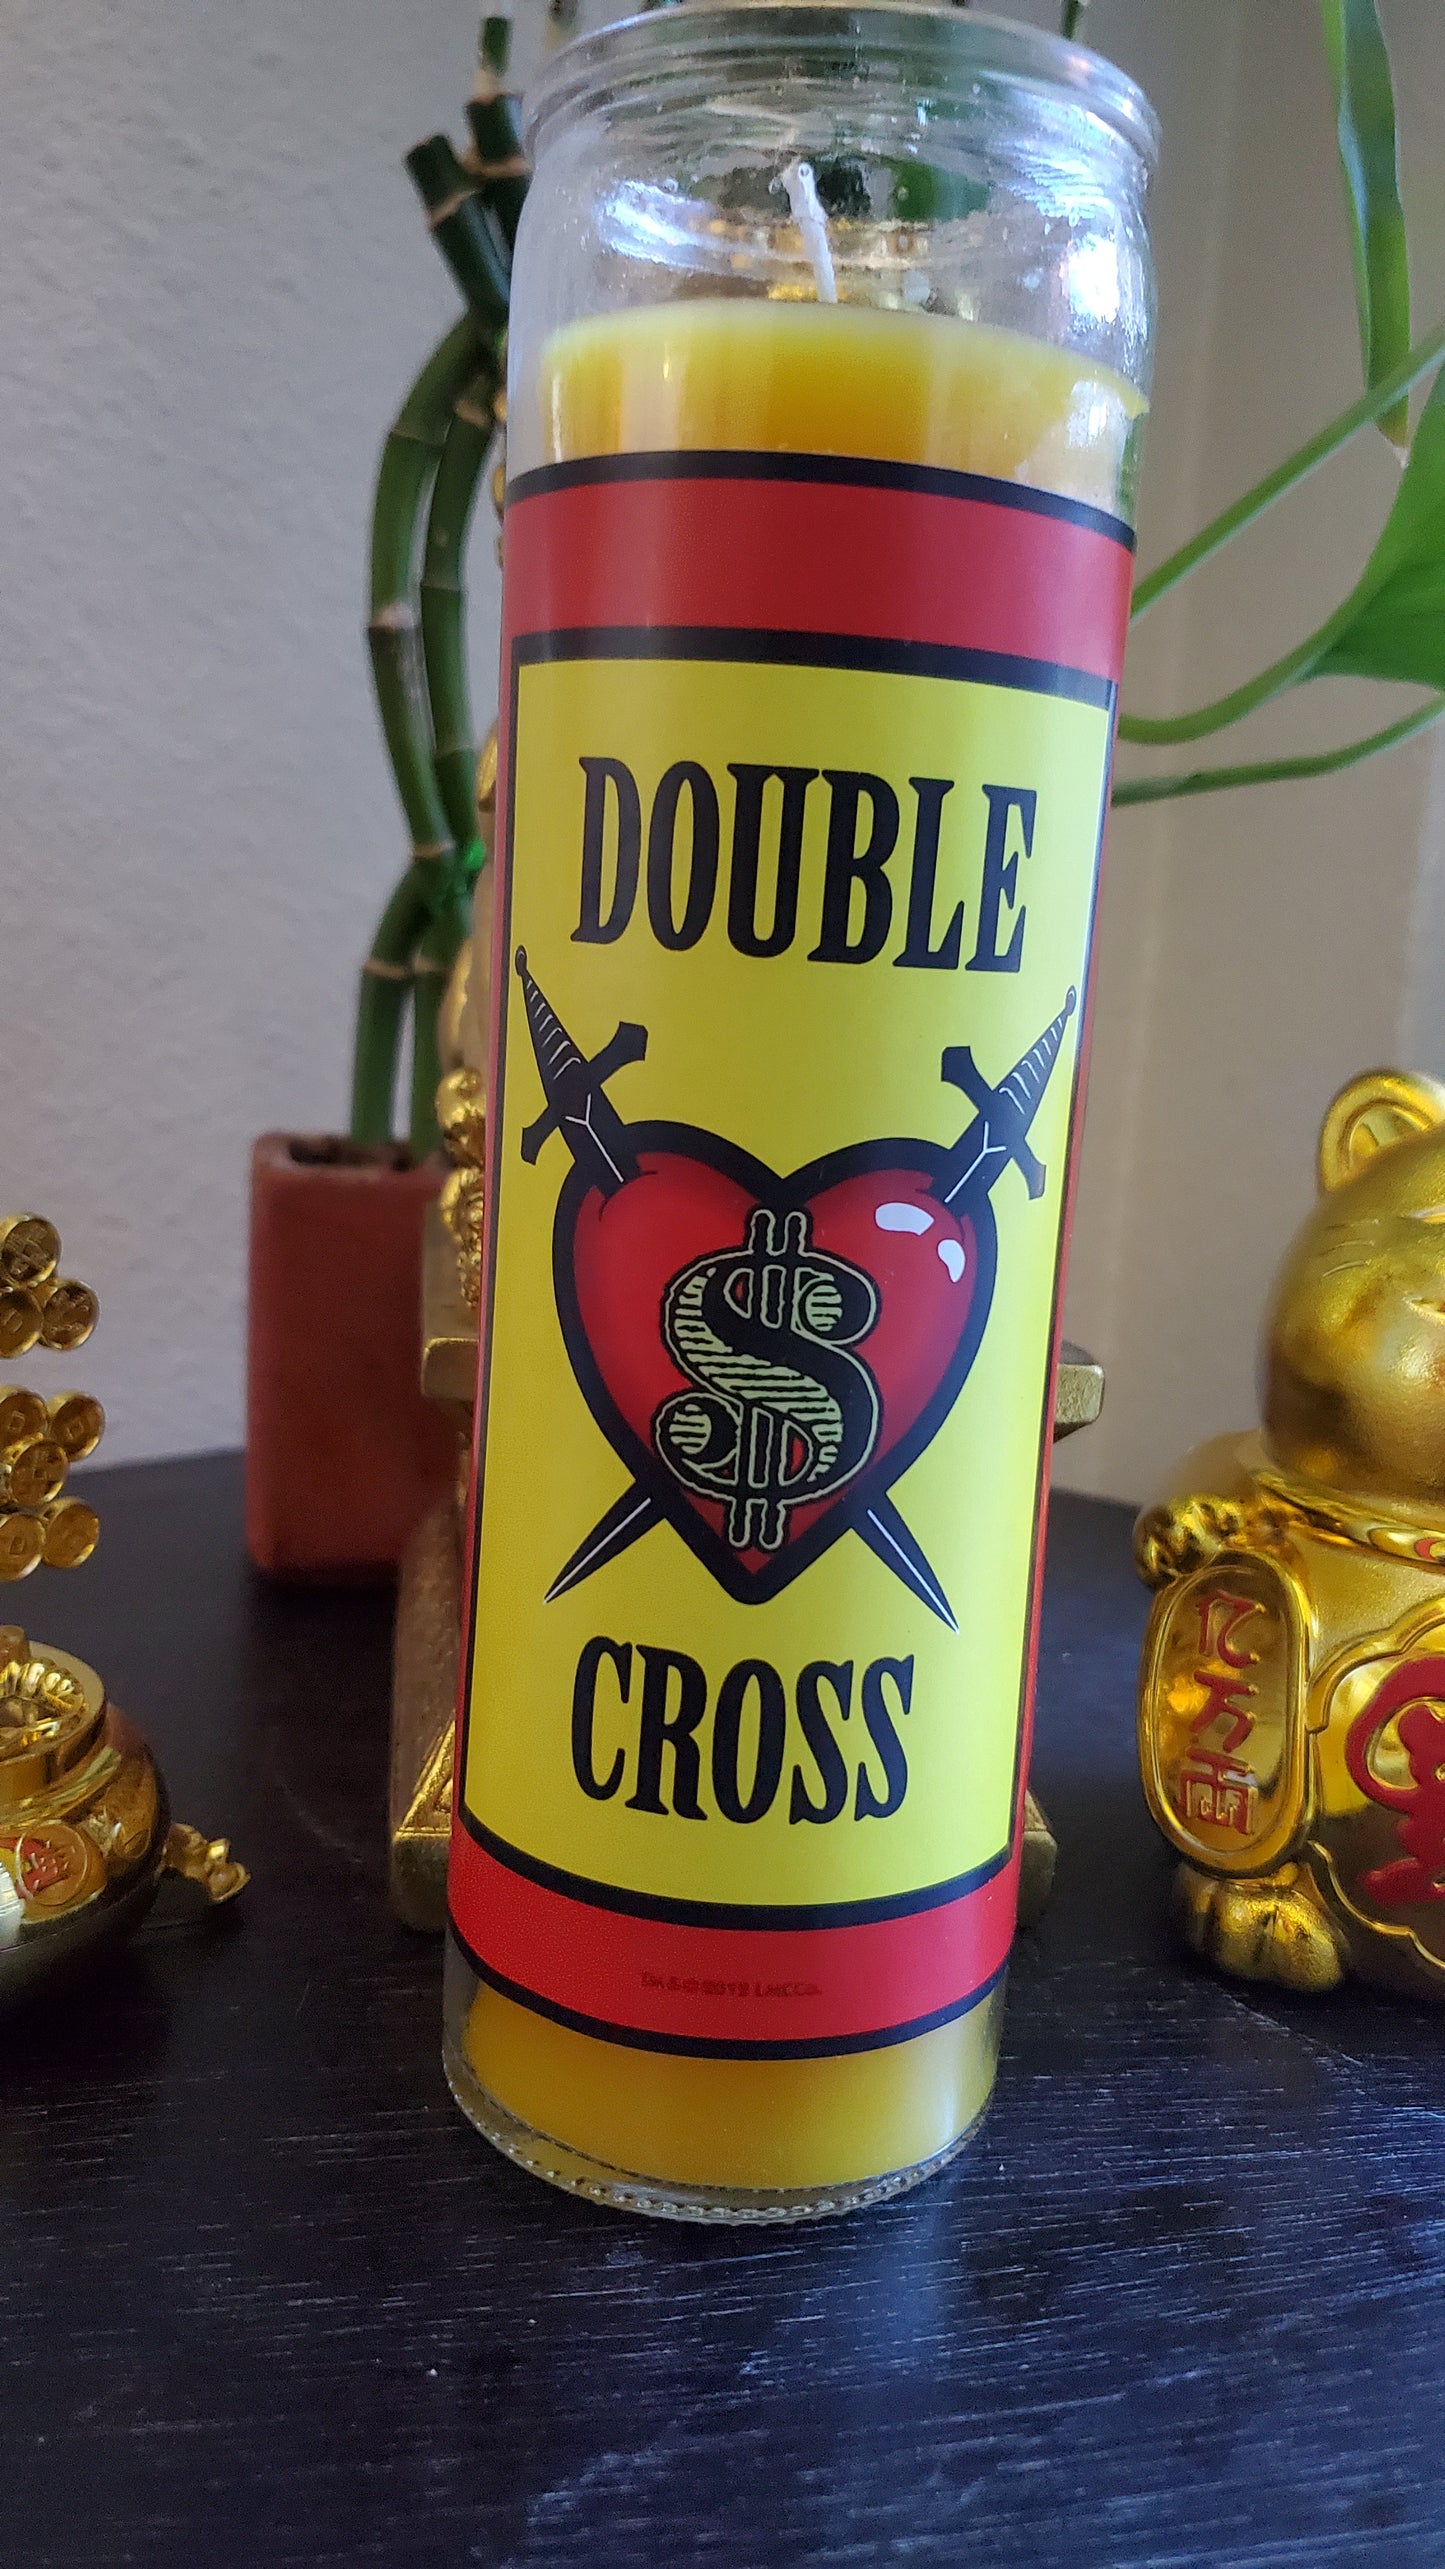 Yellow Fixed "Double Cross" 7 day Glass Vigil Candle Paraffin Wax #SpellCandles #RootWork #Conjure #CandleMagick #LuckyMojoCurioCo